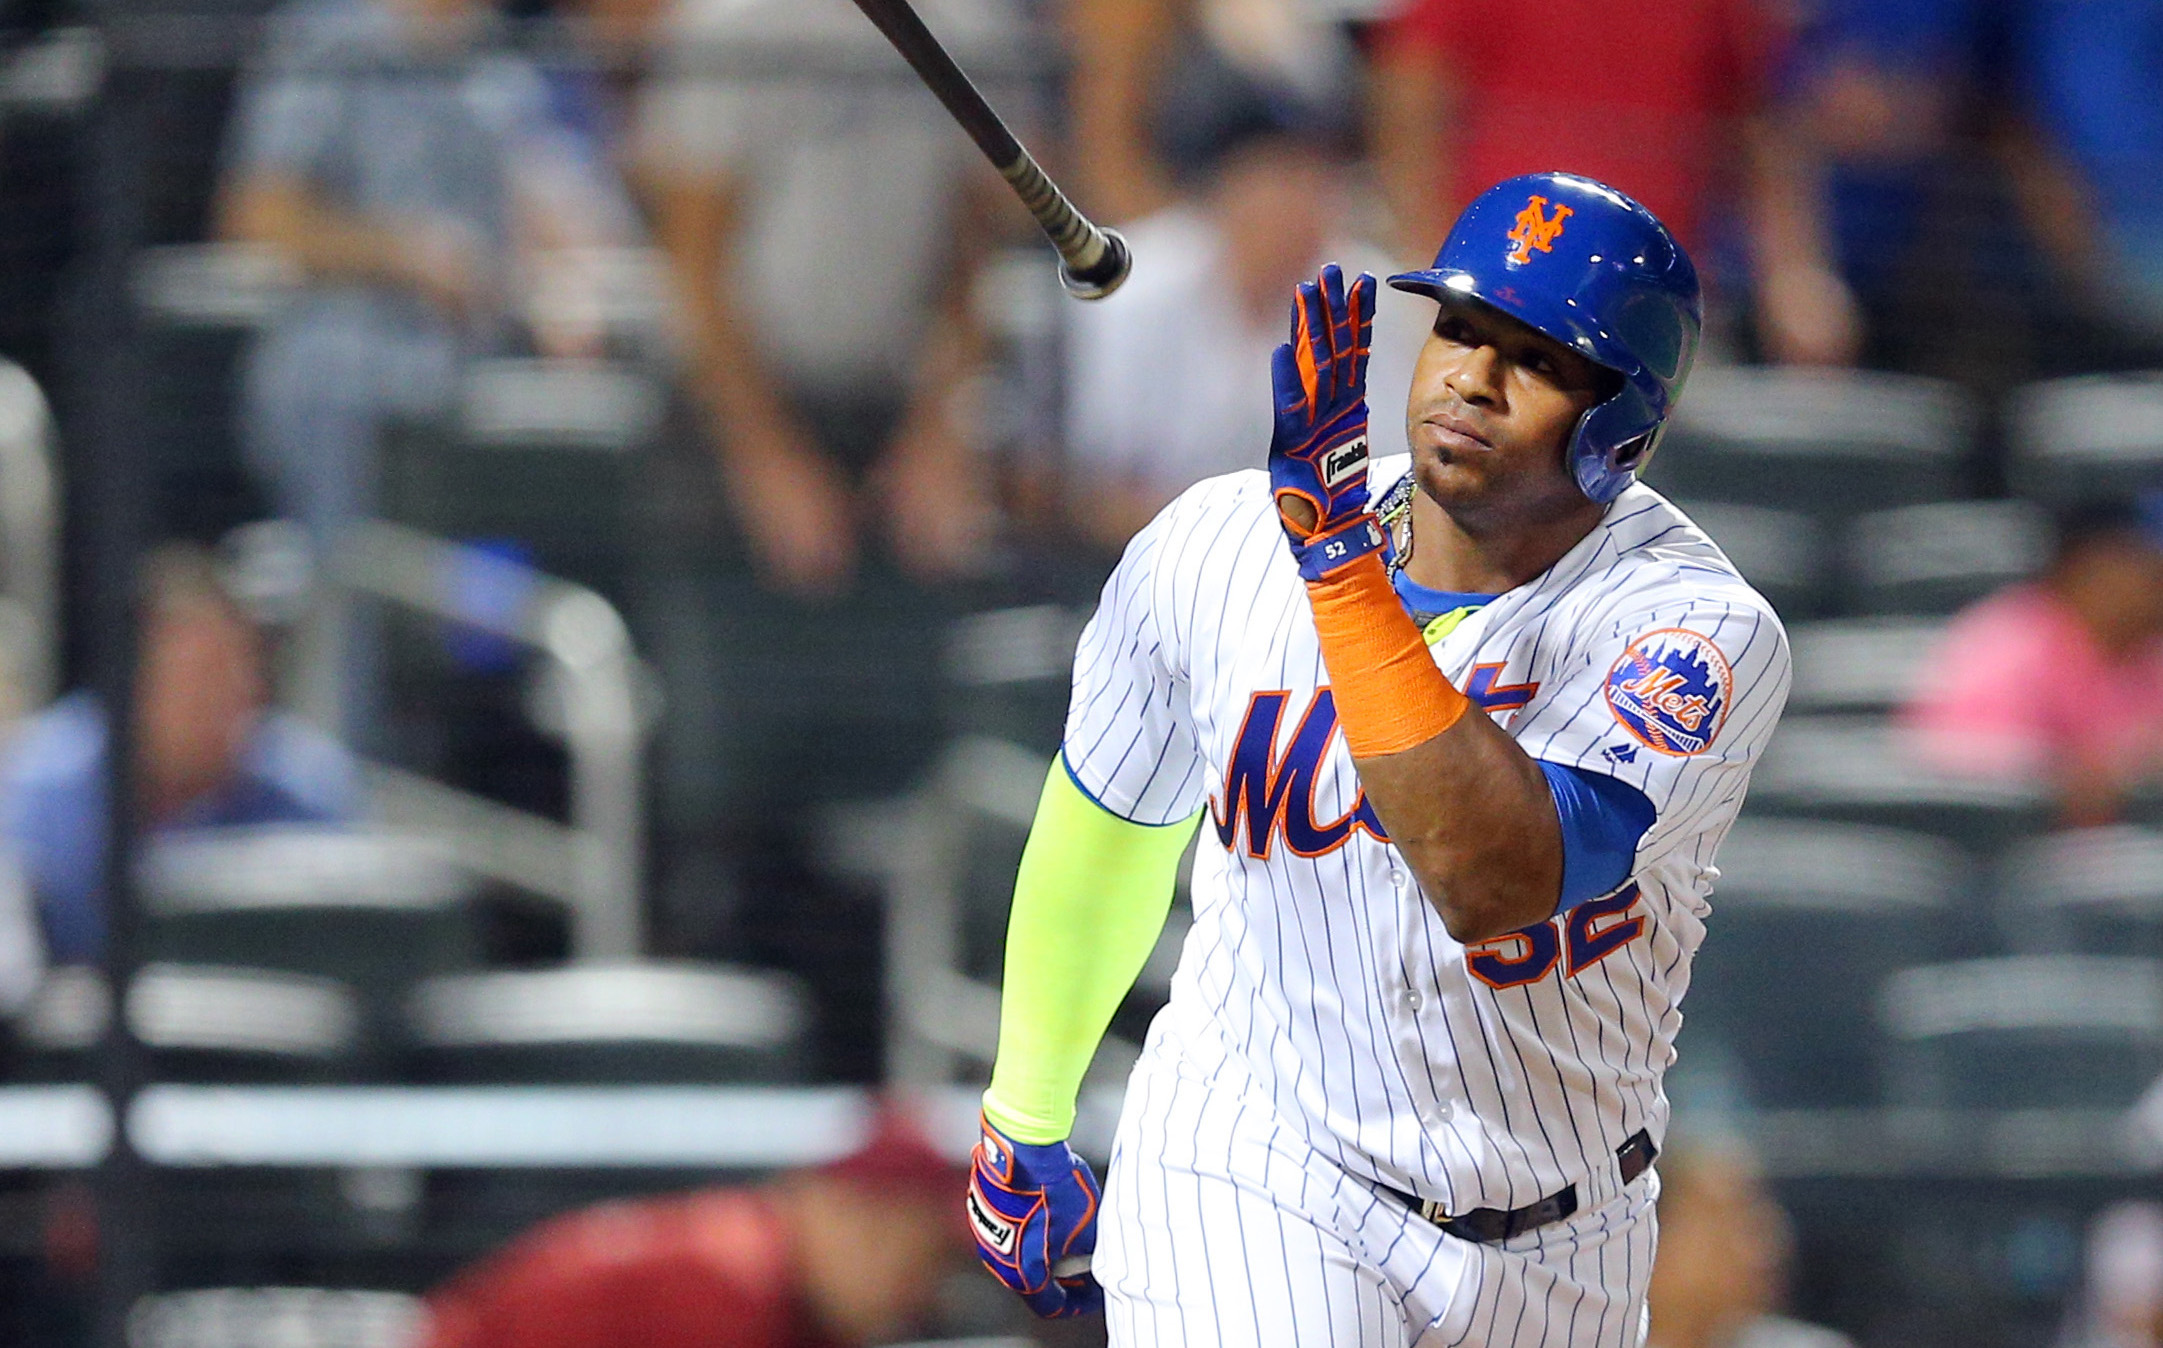 Monday Mets: The Jekyll and Hyde Start For Yoenis Cespedes